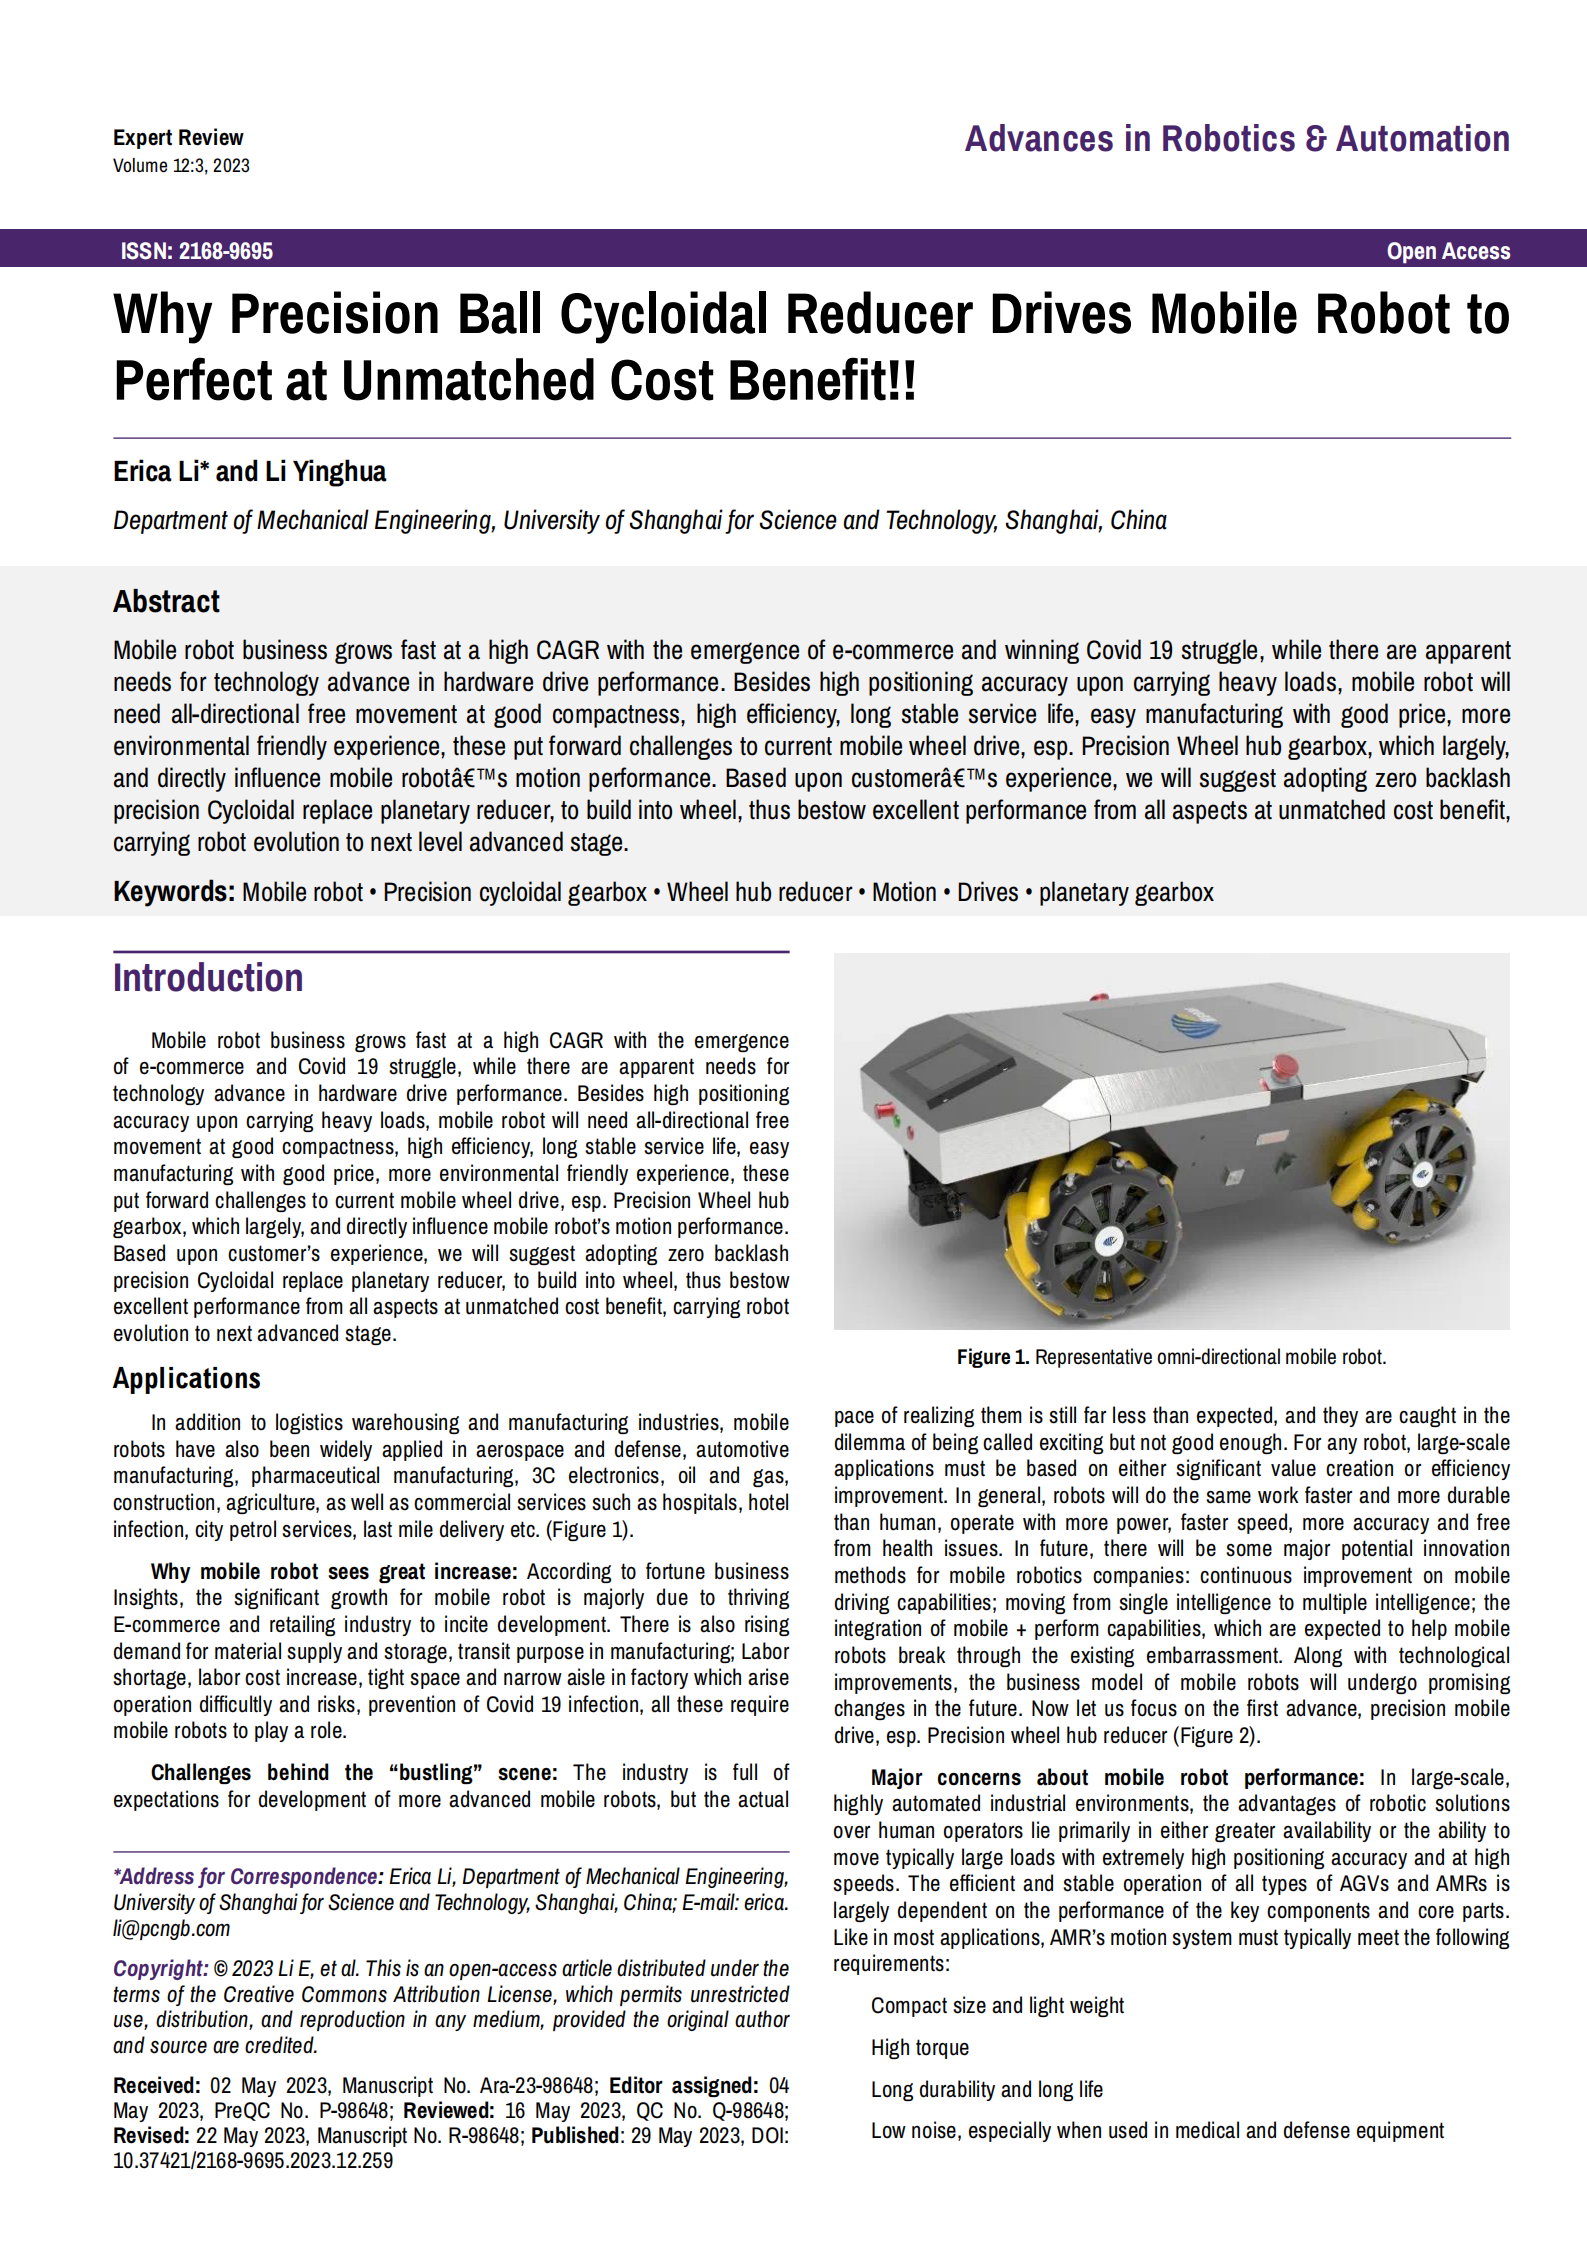 why-precision-ball-cycloidal-reducer-drives-mobile-robot--to-perfect-at-unmatched-cost-benefit (1)_00.png